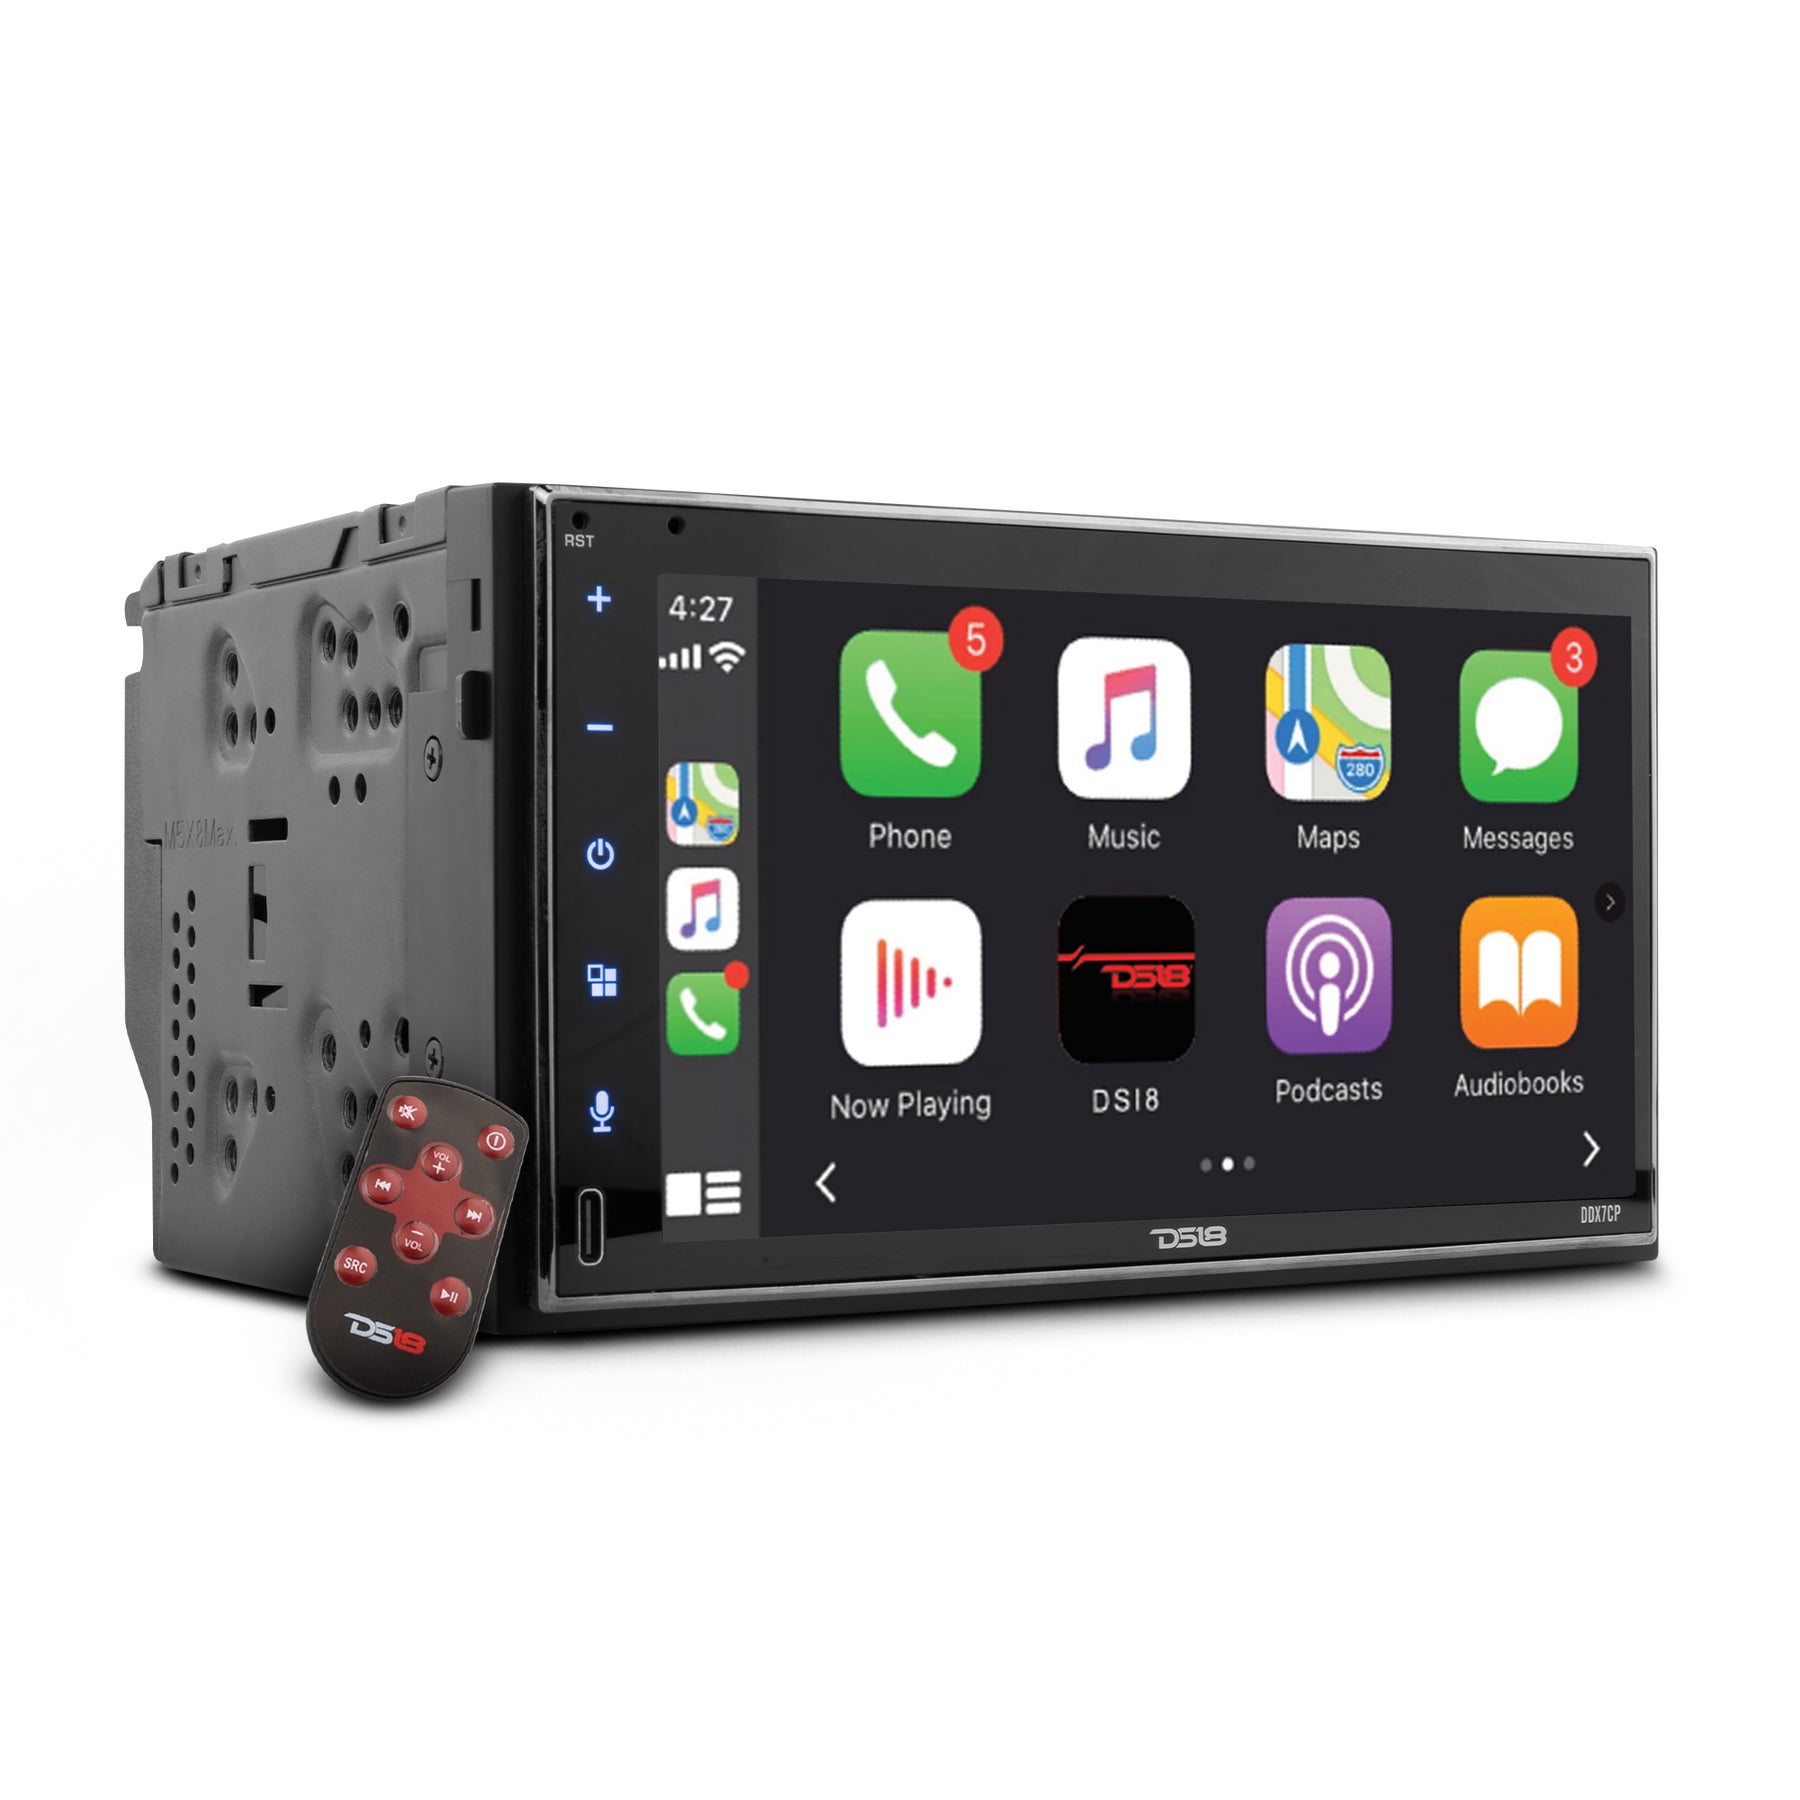 Double Din Car Stereo 7 Touch Screen 2 Din Car Radio with Bluetooth FM,  MP5 Player with USB/SD/AUX Input 2 Din Autoradio with Mirror Link